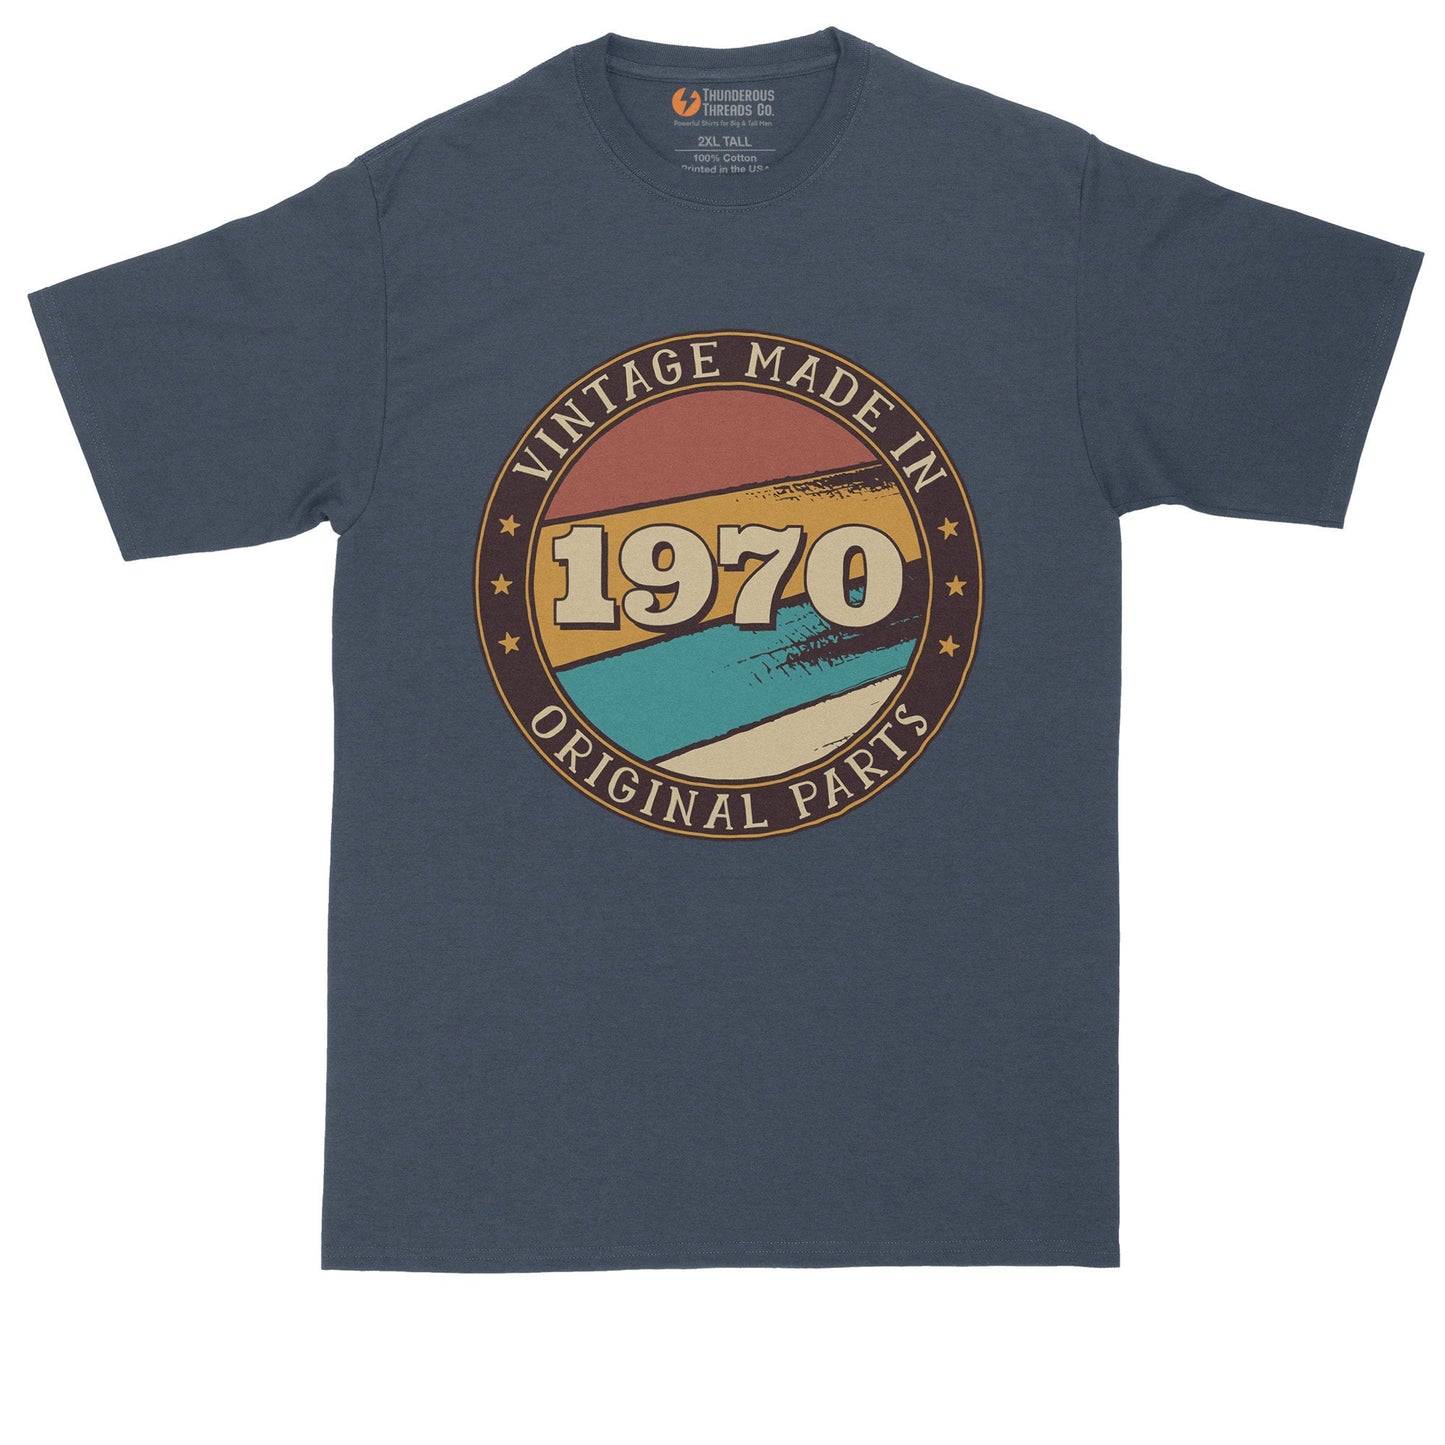 Vintage Made in 1970 Original Parts | Personalize with Your Own Year | Birthday Shirt | Mens Big & Tall T-Shirt